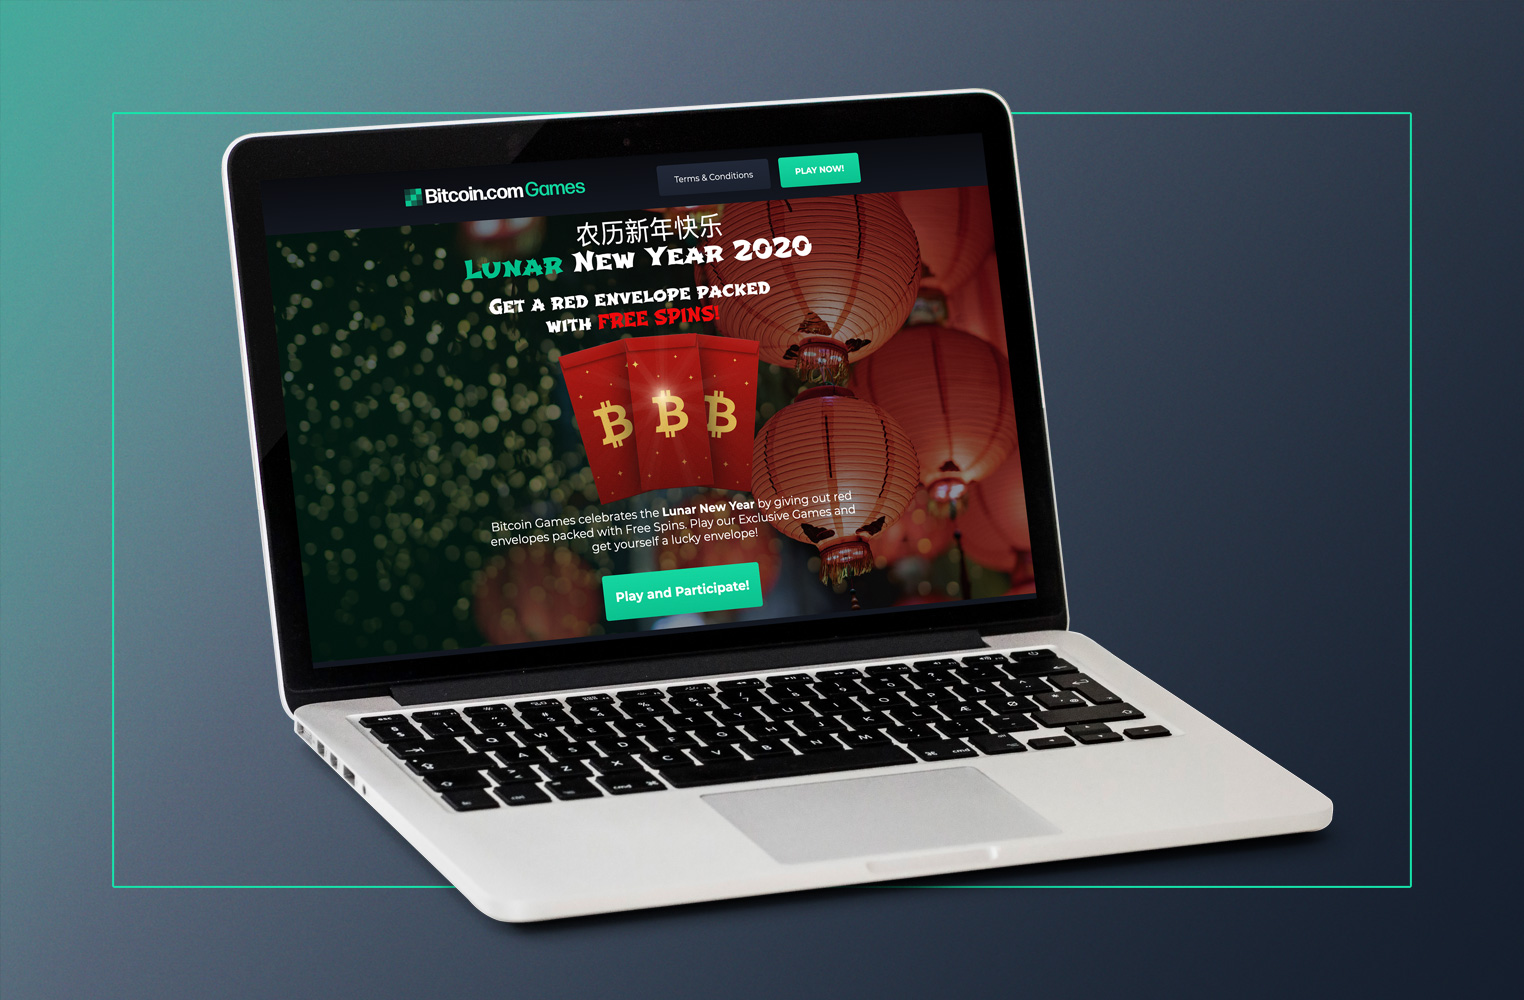 Bitcoin Games Celebrates Lunar New Year 2020 With Introduction of Free Spins